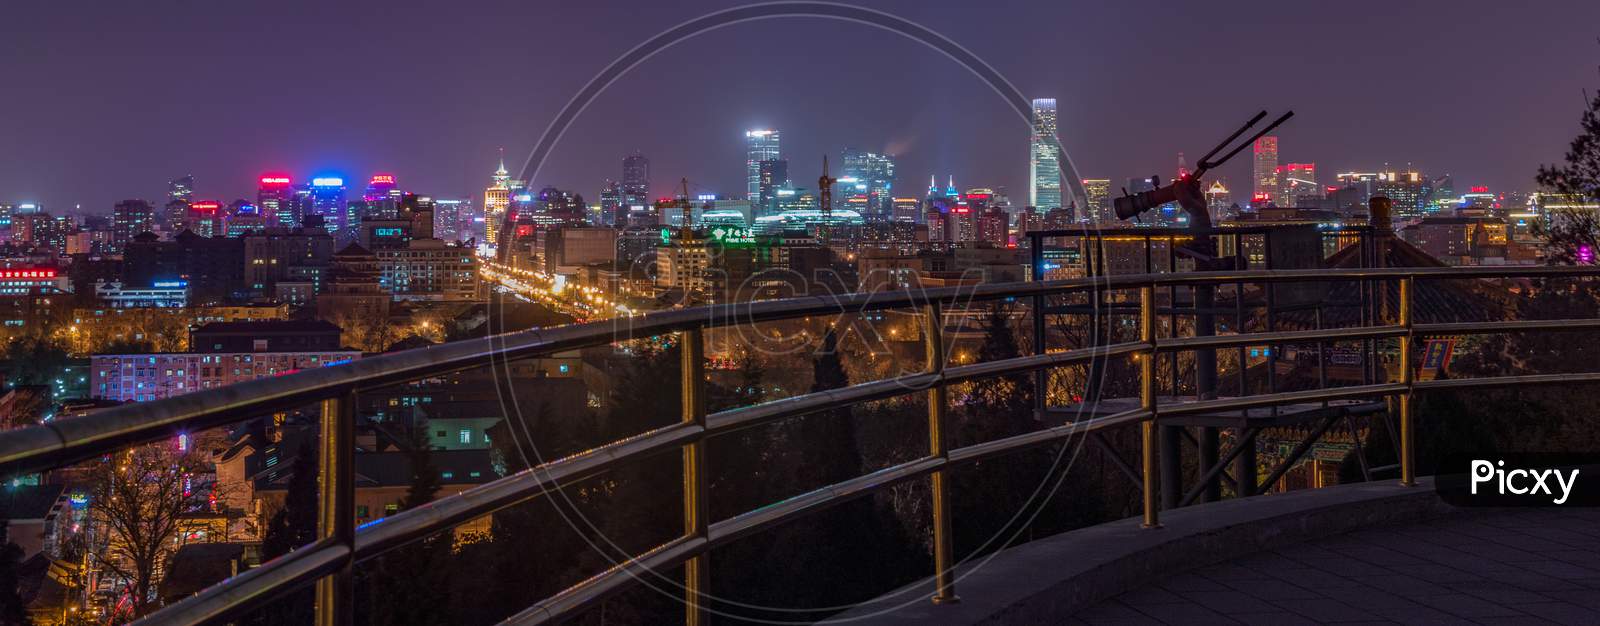 Panoramic Night View Of The Central Business District In Beijing, China